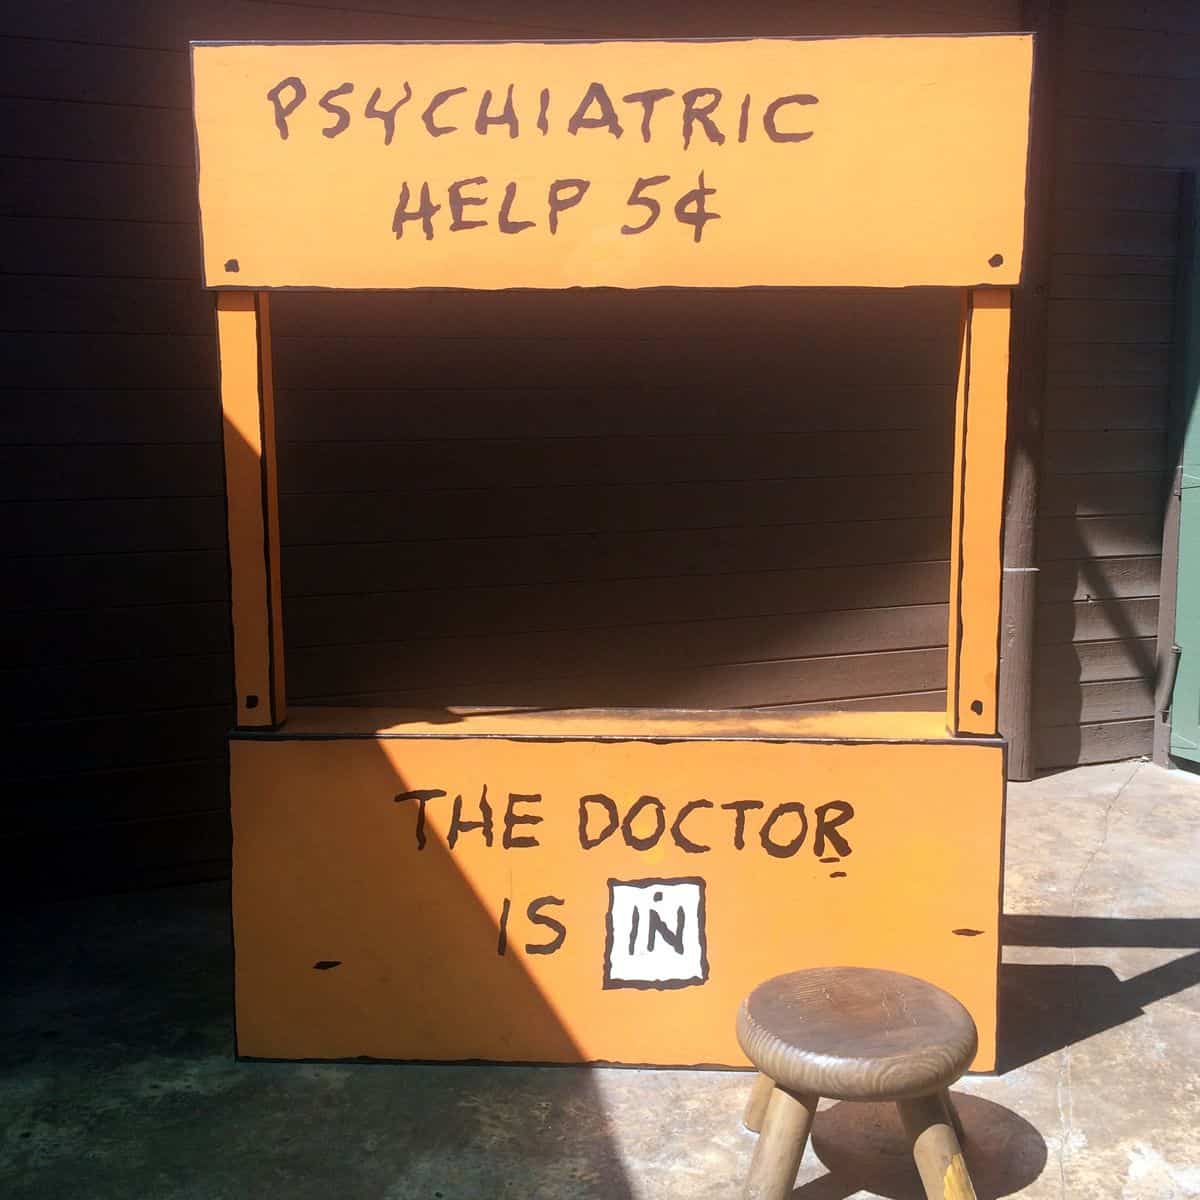 The orange “Psychiatric Help” booth from the comic strip Peanuts.